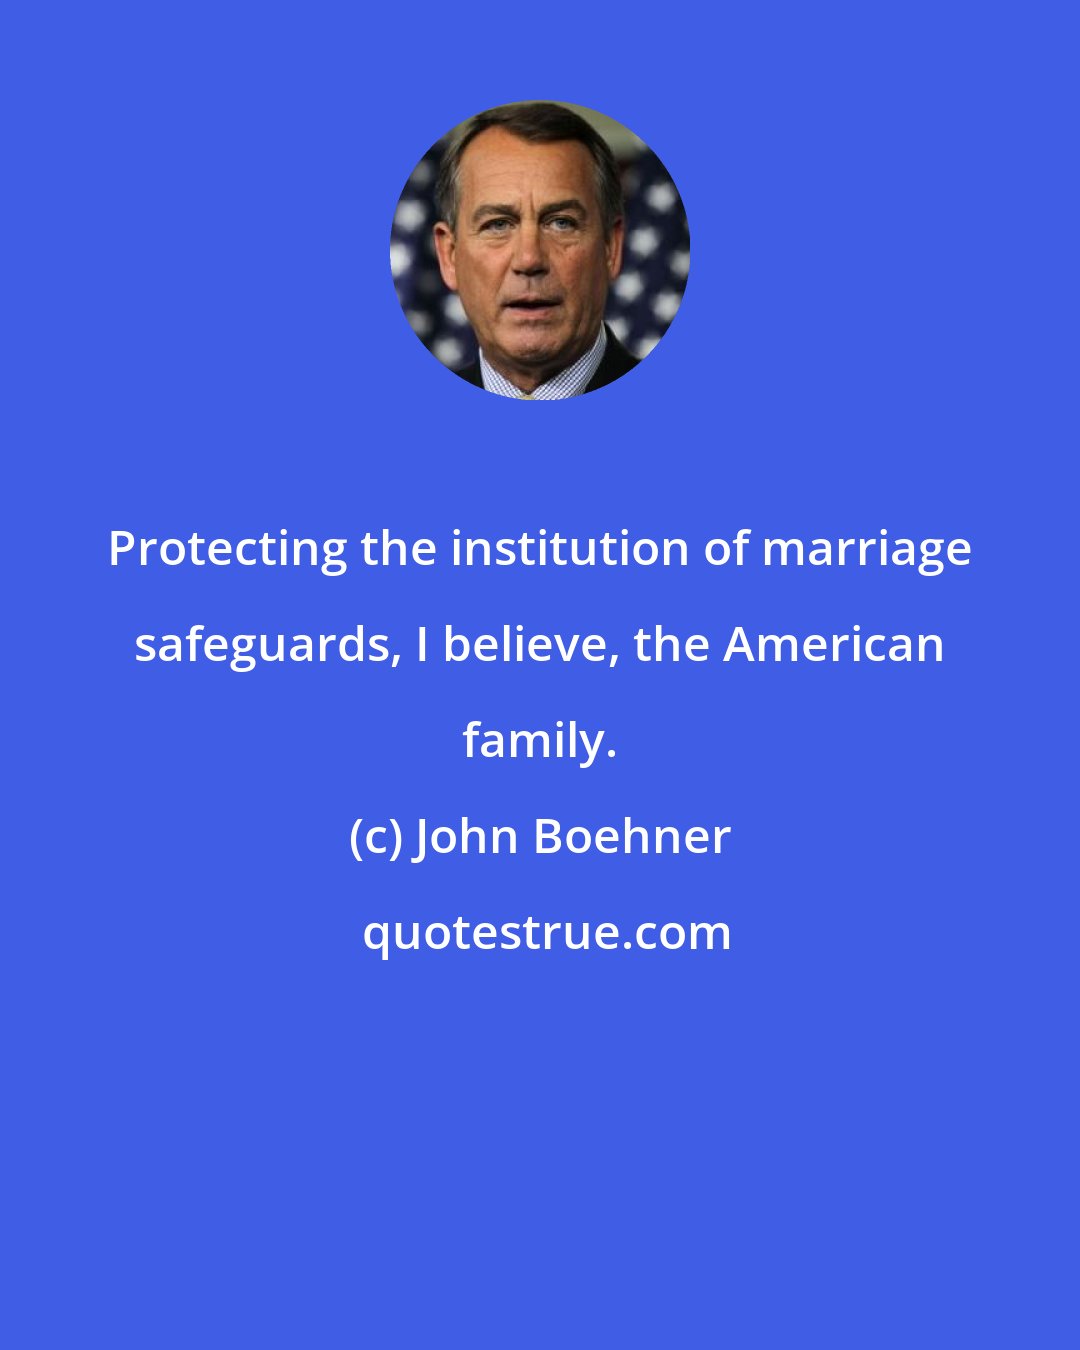 John Boehner: Protecting the institution of marriage safeguards, I believe, the American family.